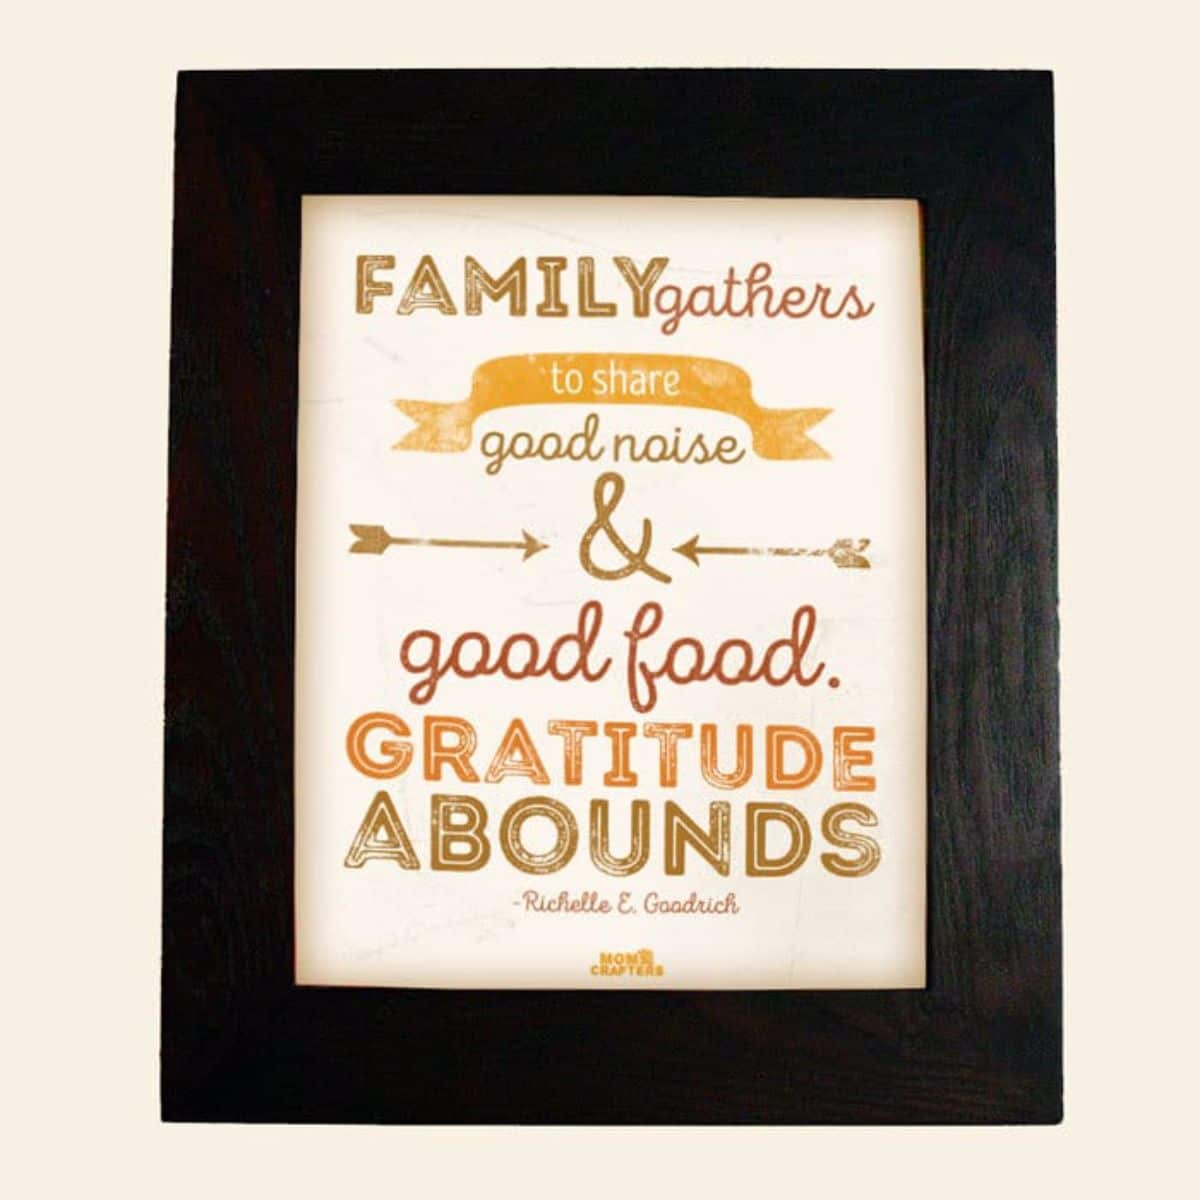 An easy Thanksgiving decor idea - a framed print that embodies the essence of family, good food, and gratitude.